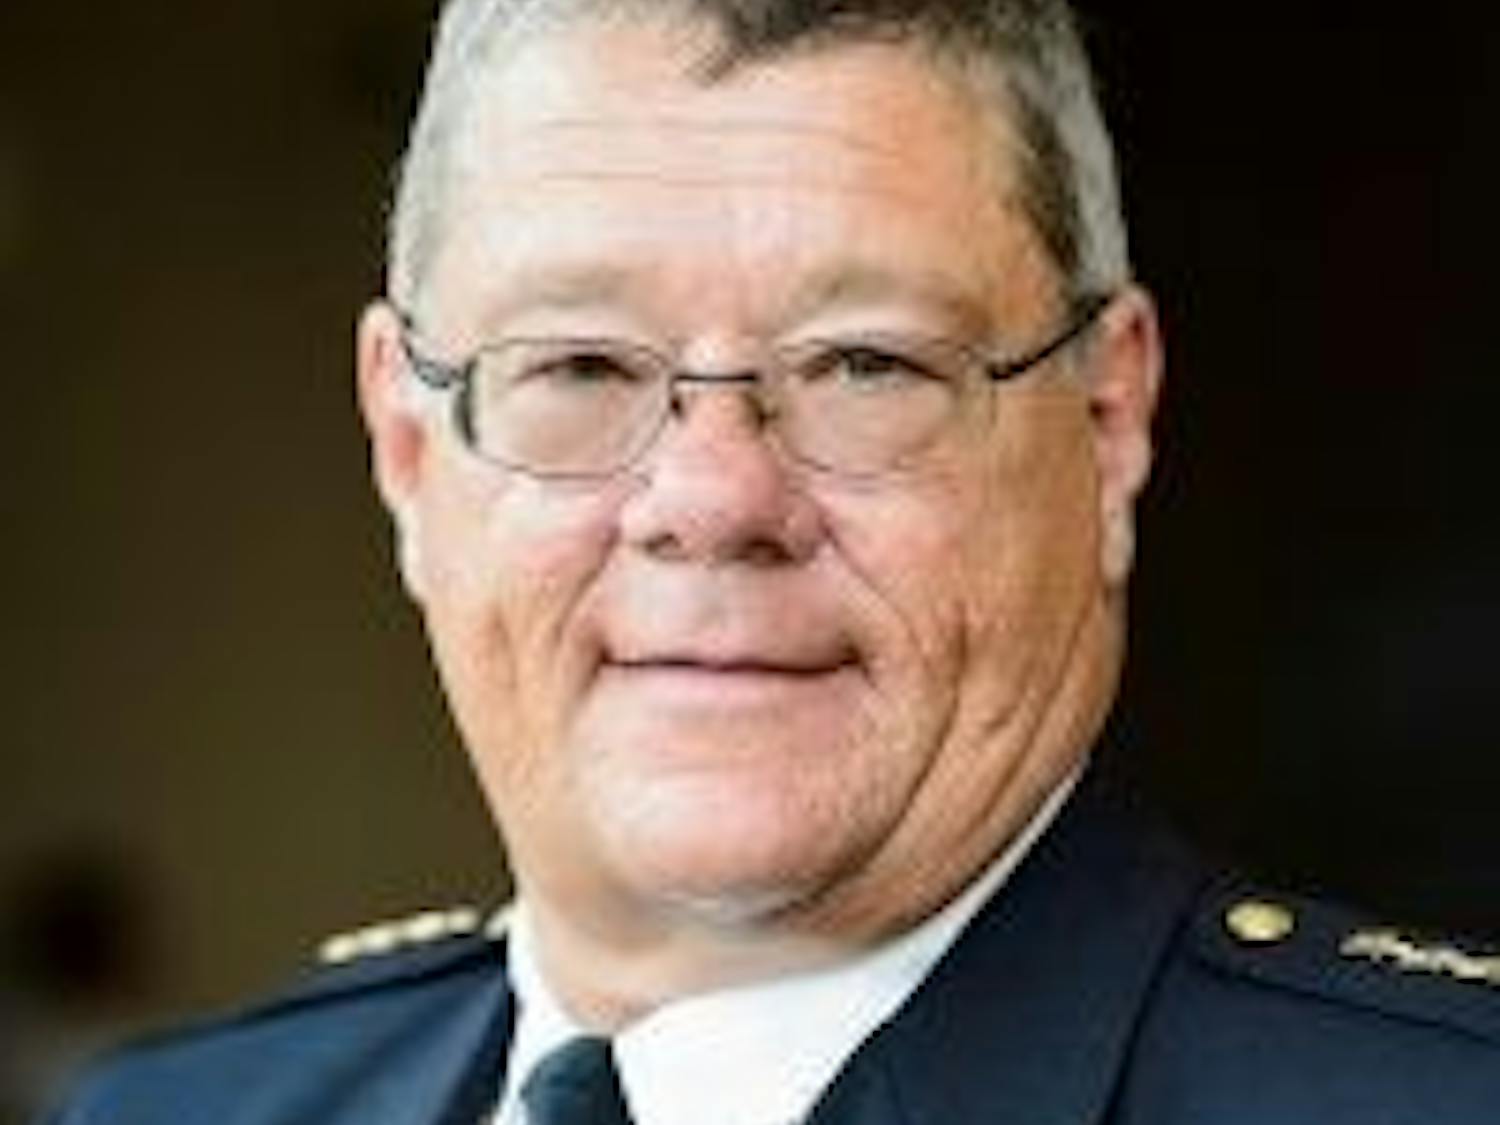 UWPD Assistant Chief Brian Bridges will retire Wednesday after 32 years at UW-Madison.